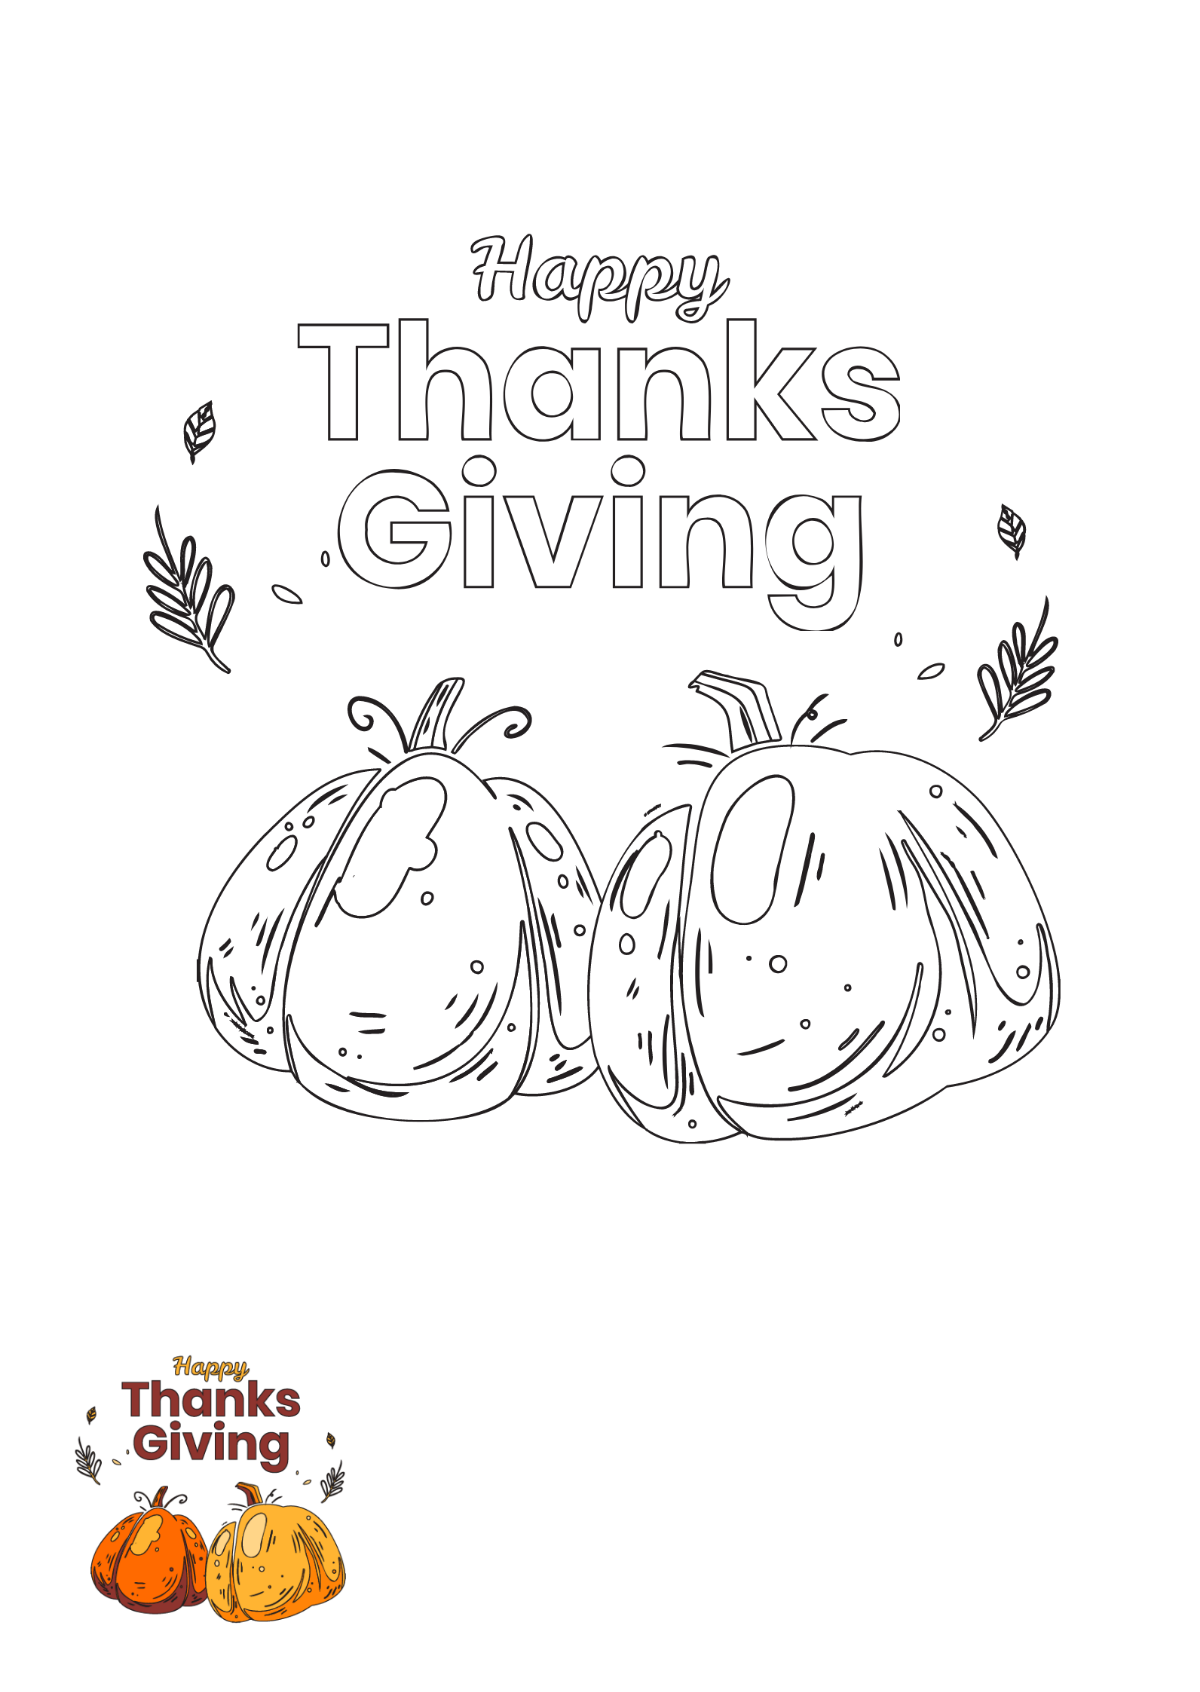 Thanksgiving Card Coloring Page Template